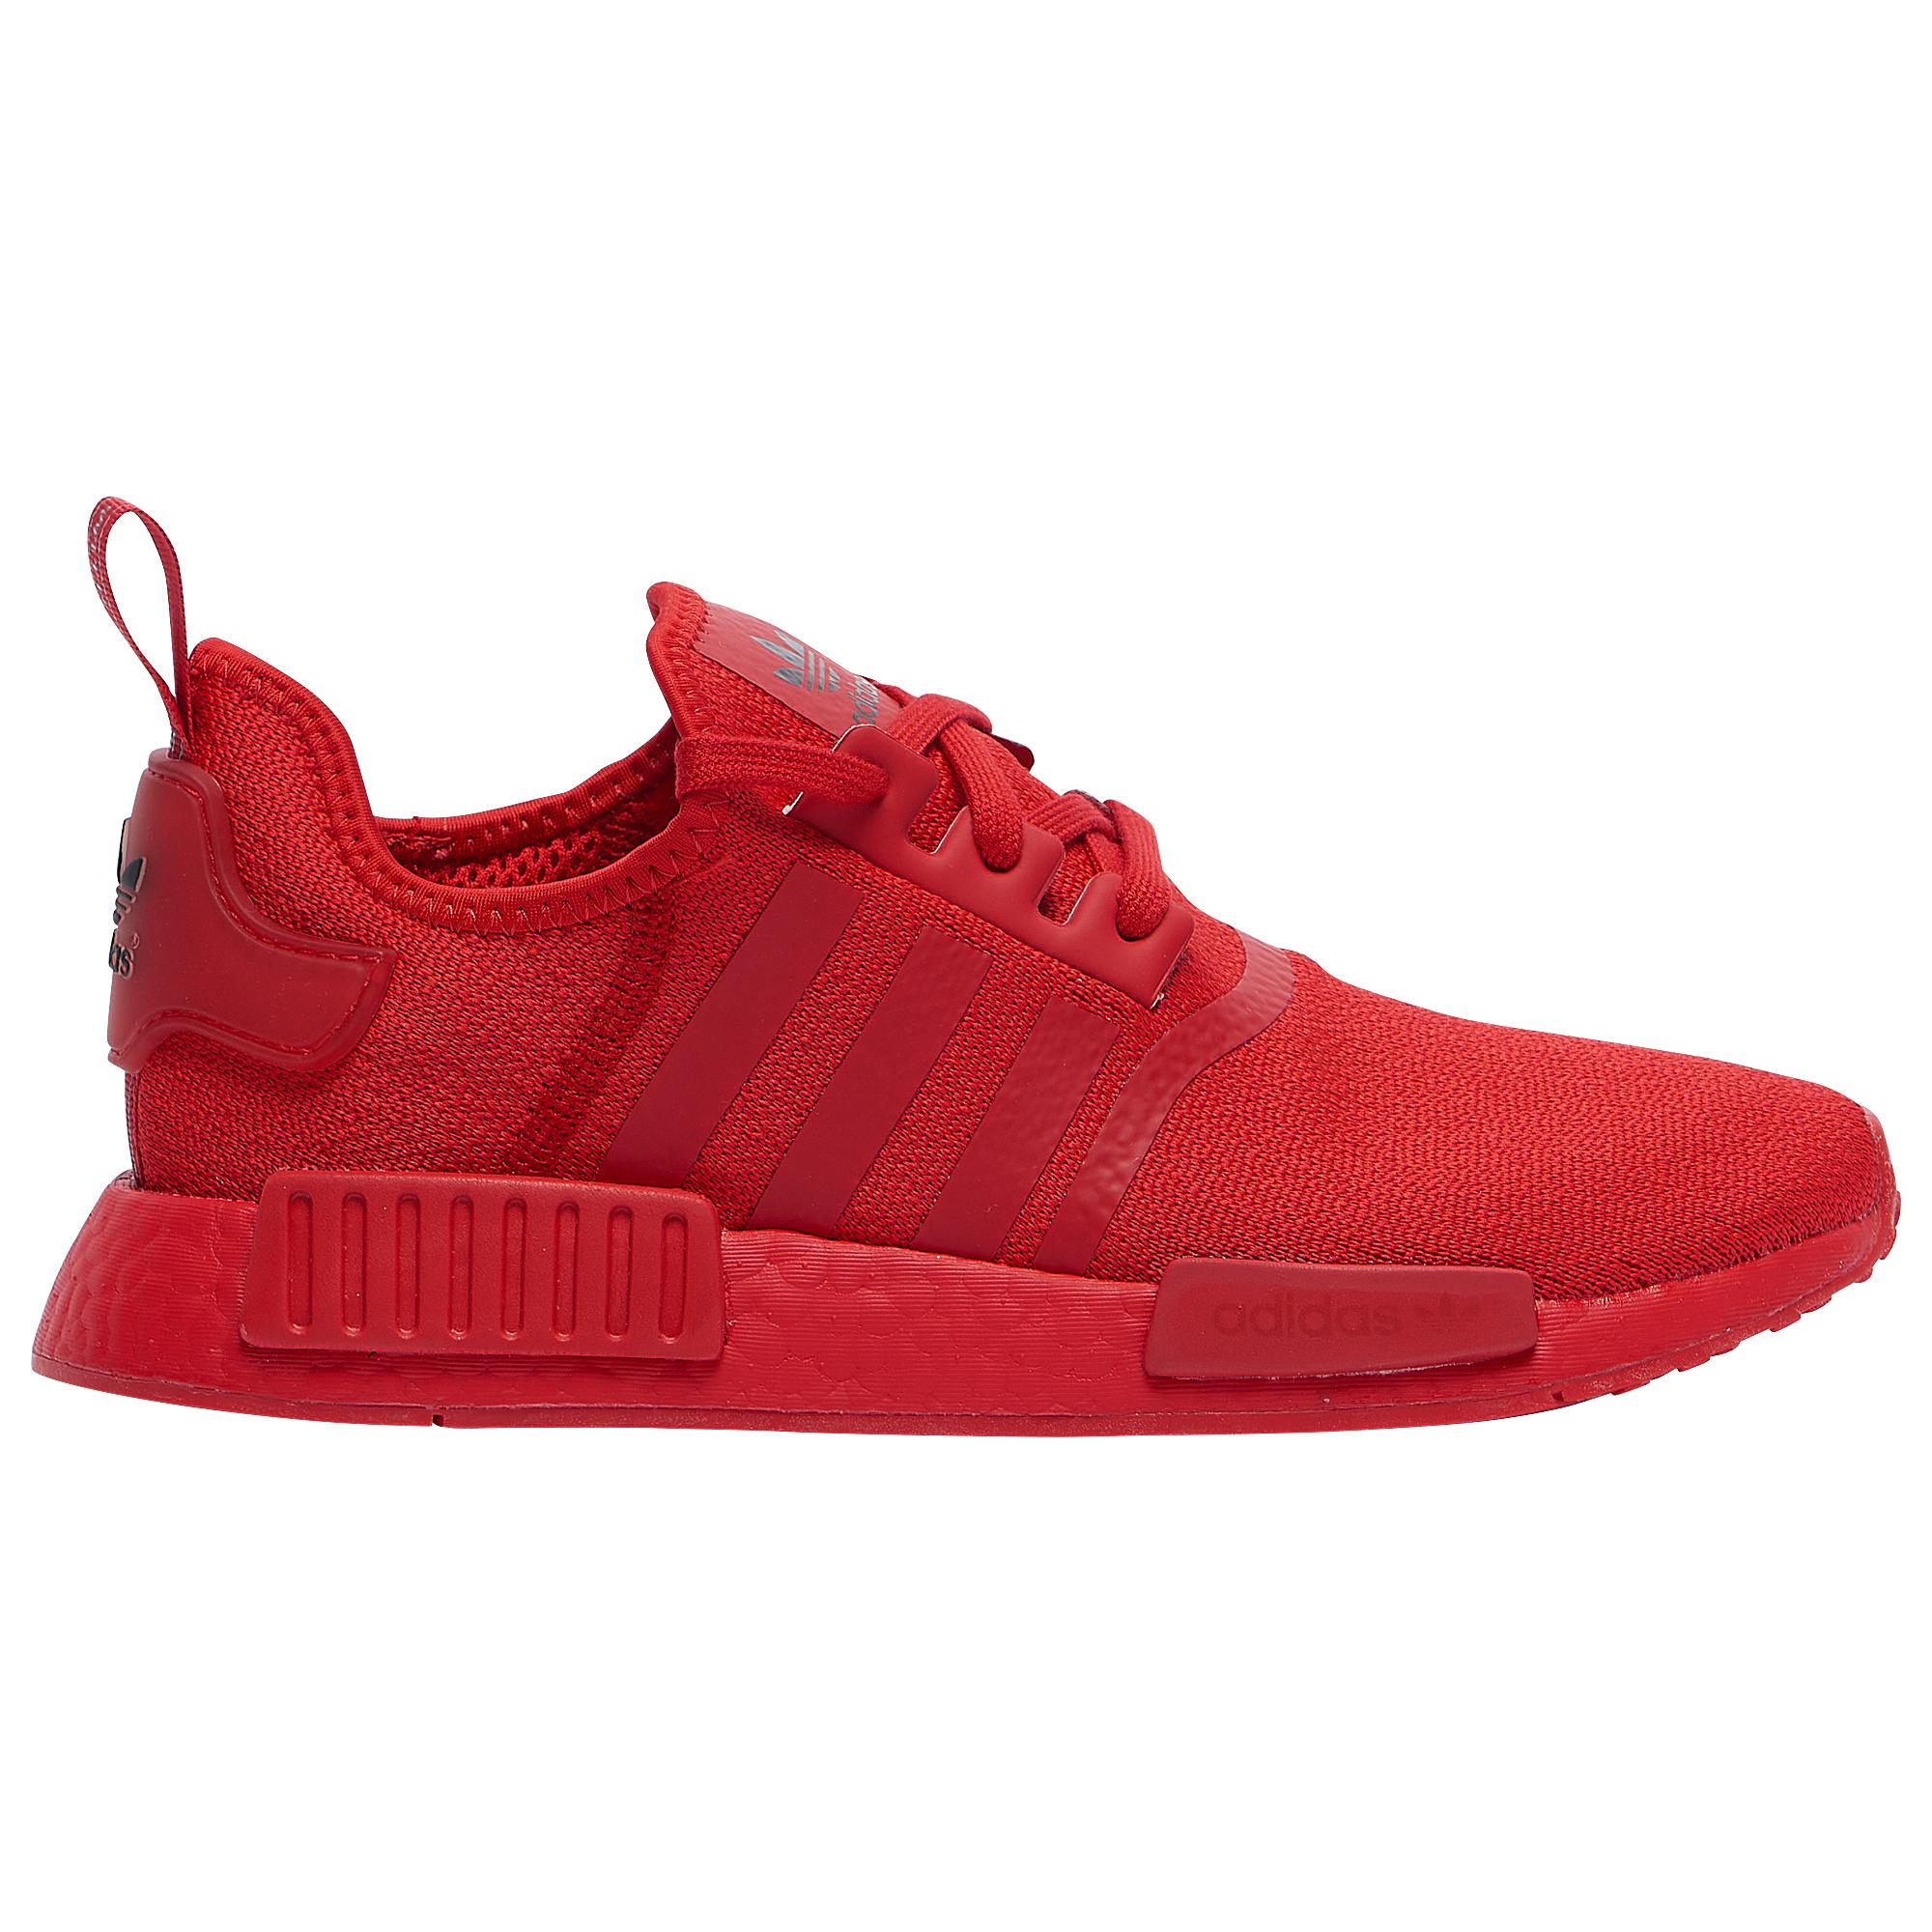 adidas Originals Rubber Nmd R1 - Running Shoes in Red/Red (Red) - Lyst